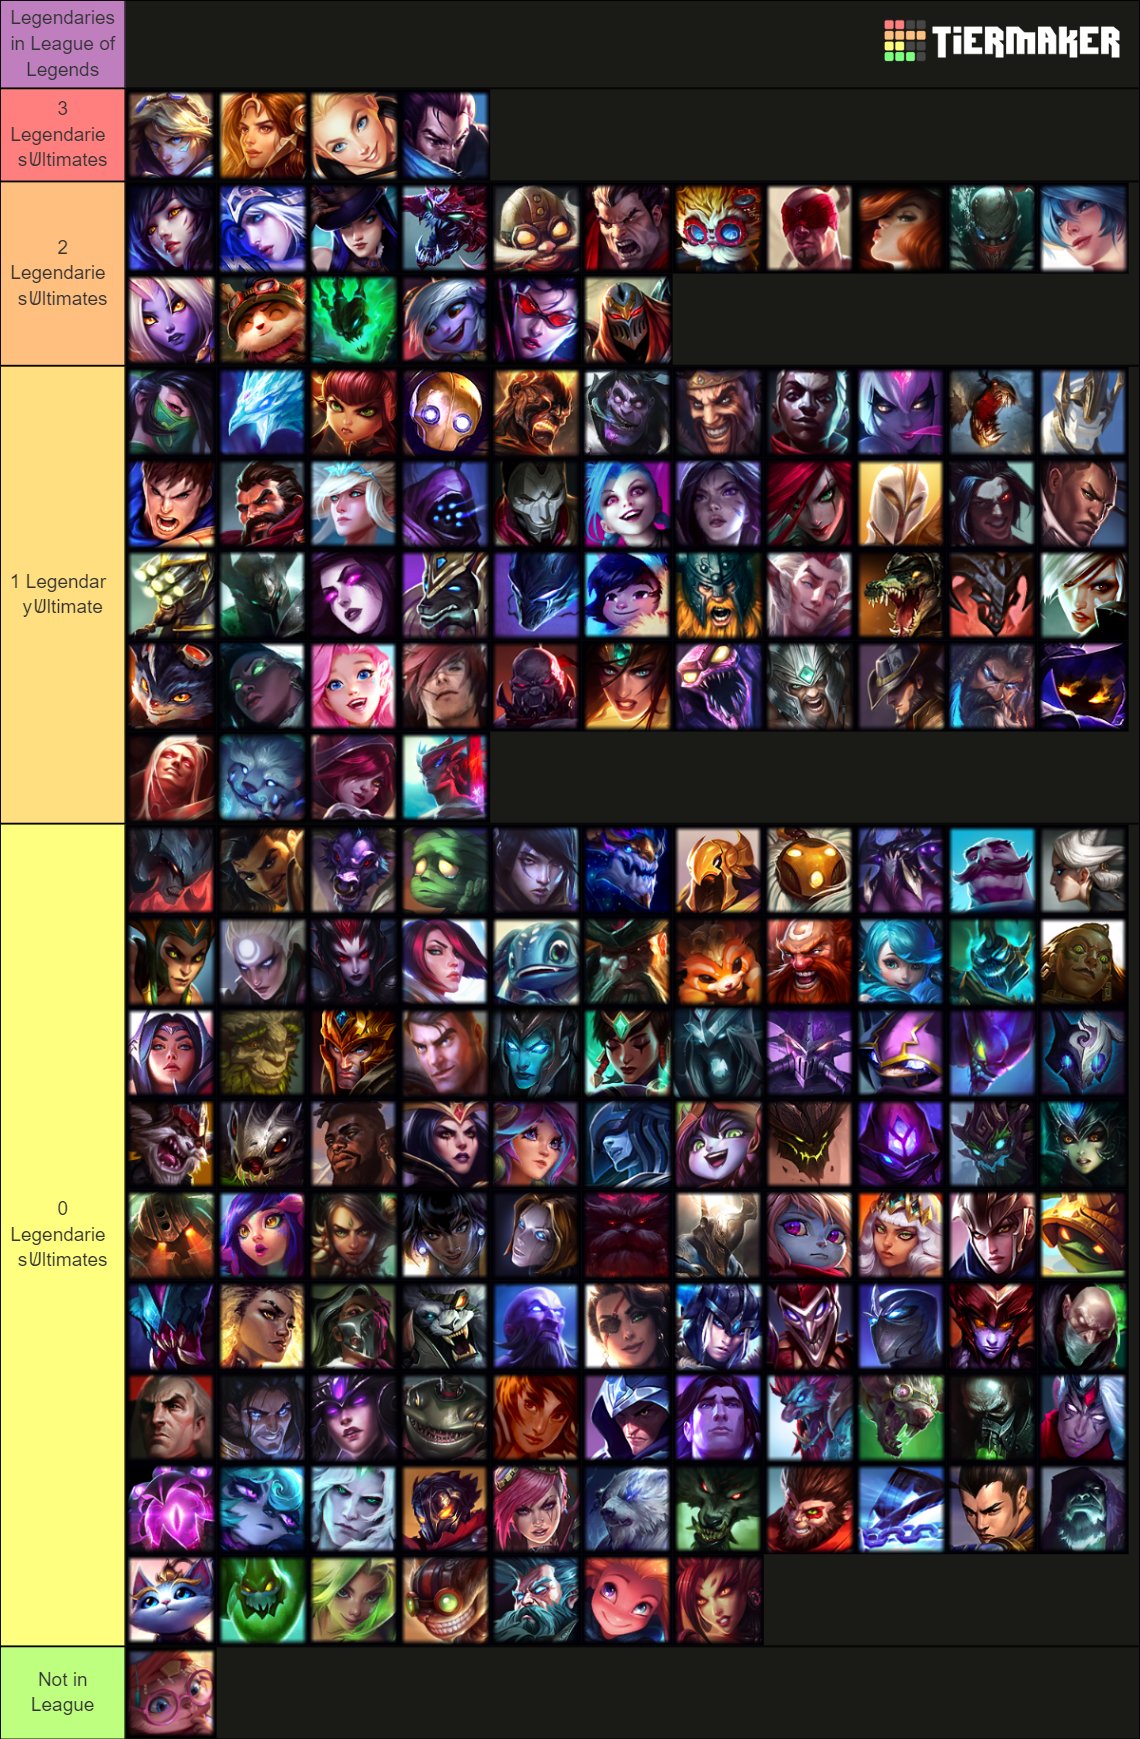 🦂Sharjo🦂 on Twitter: "Ok quick tierlist: "How many legendary+ quality skins does have" This counts all skins the champion has that are at the 1820 rp or higher threshold, irrespective